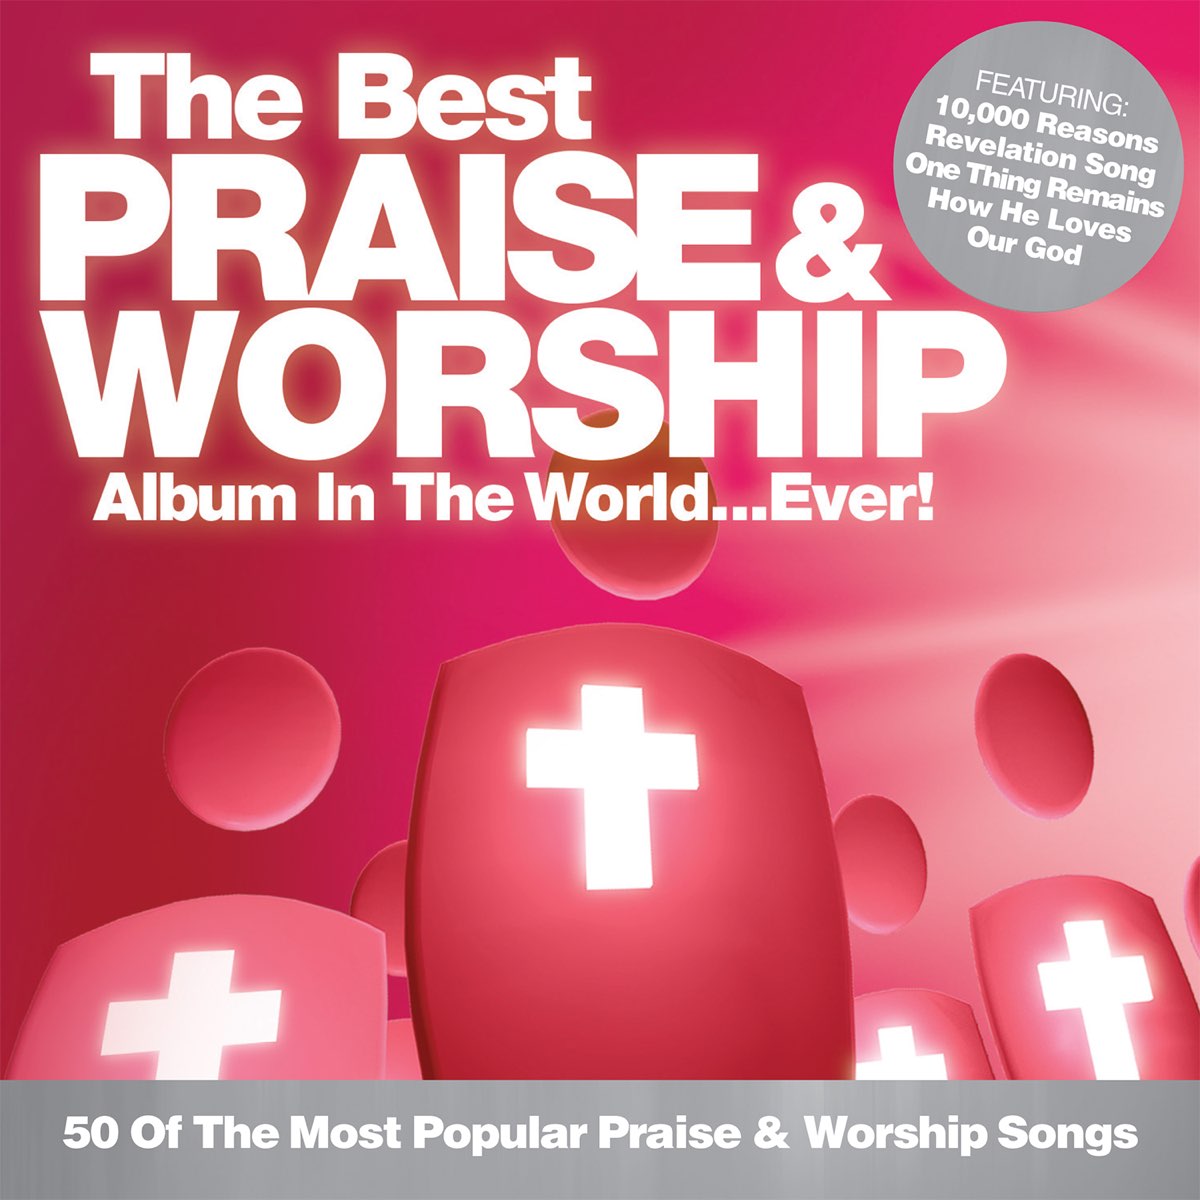 ‎The Best Praise & Worship Album In the World...Ever! by Various